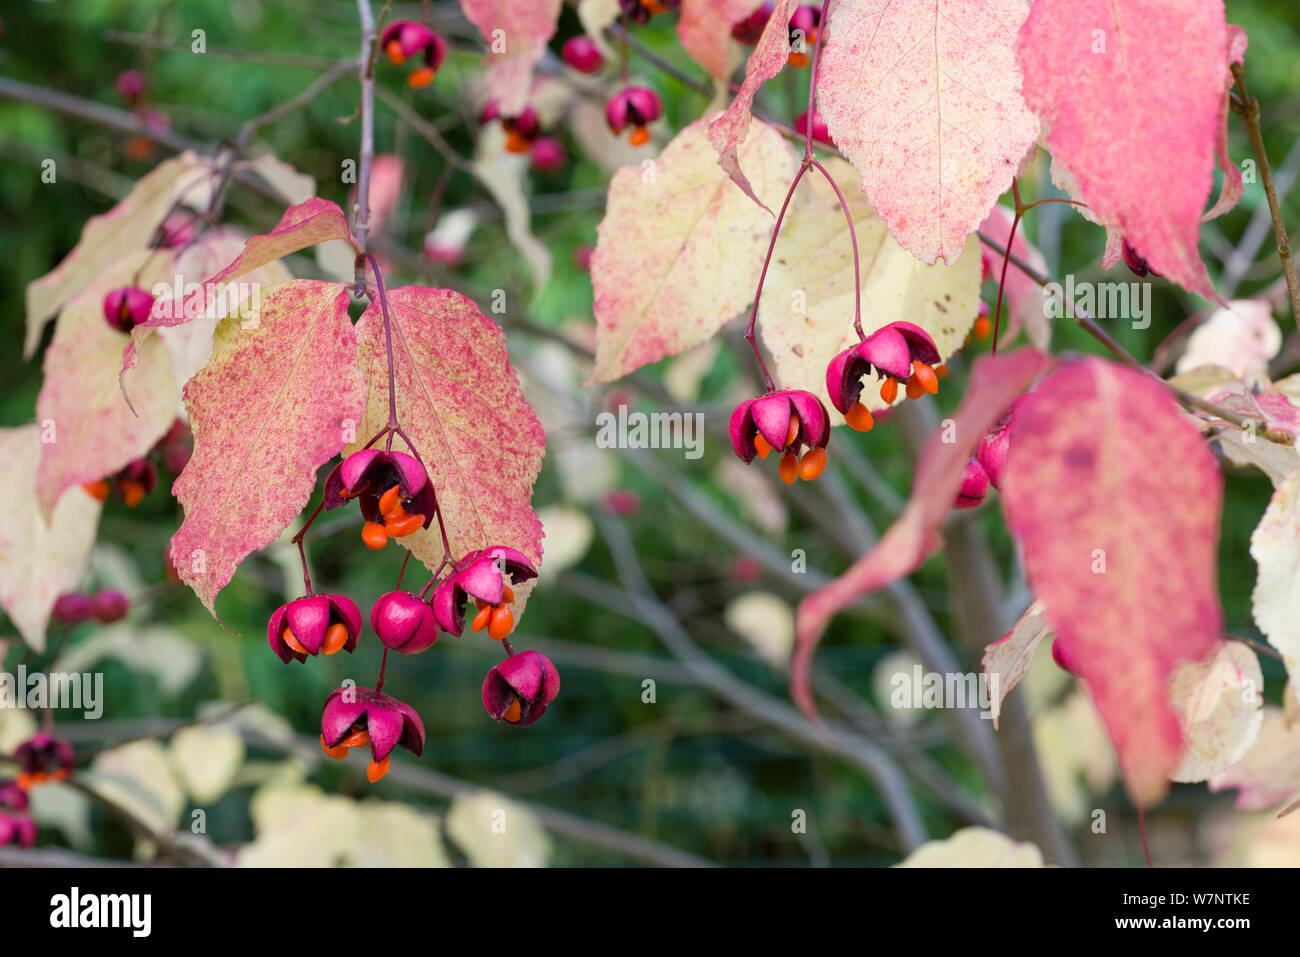 Spindle (Euonymus oxyphyllus) showing the seed cases ejecting seeds, UK October Stock Photo